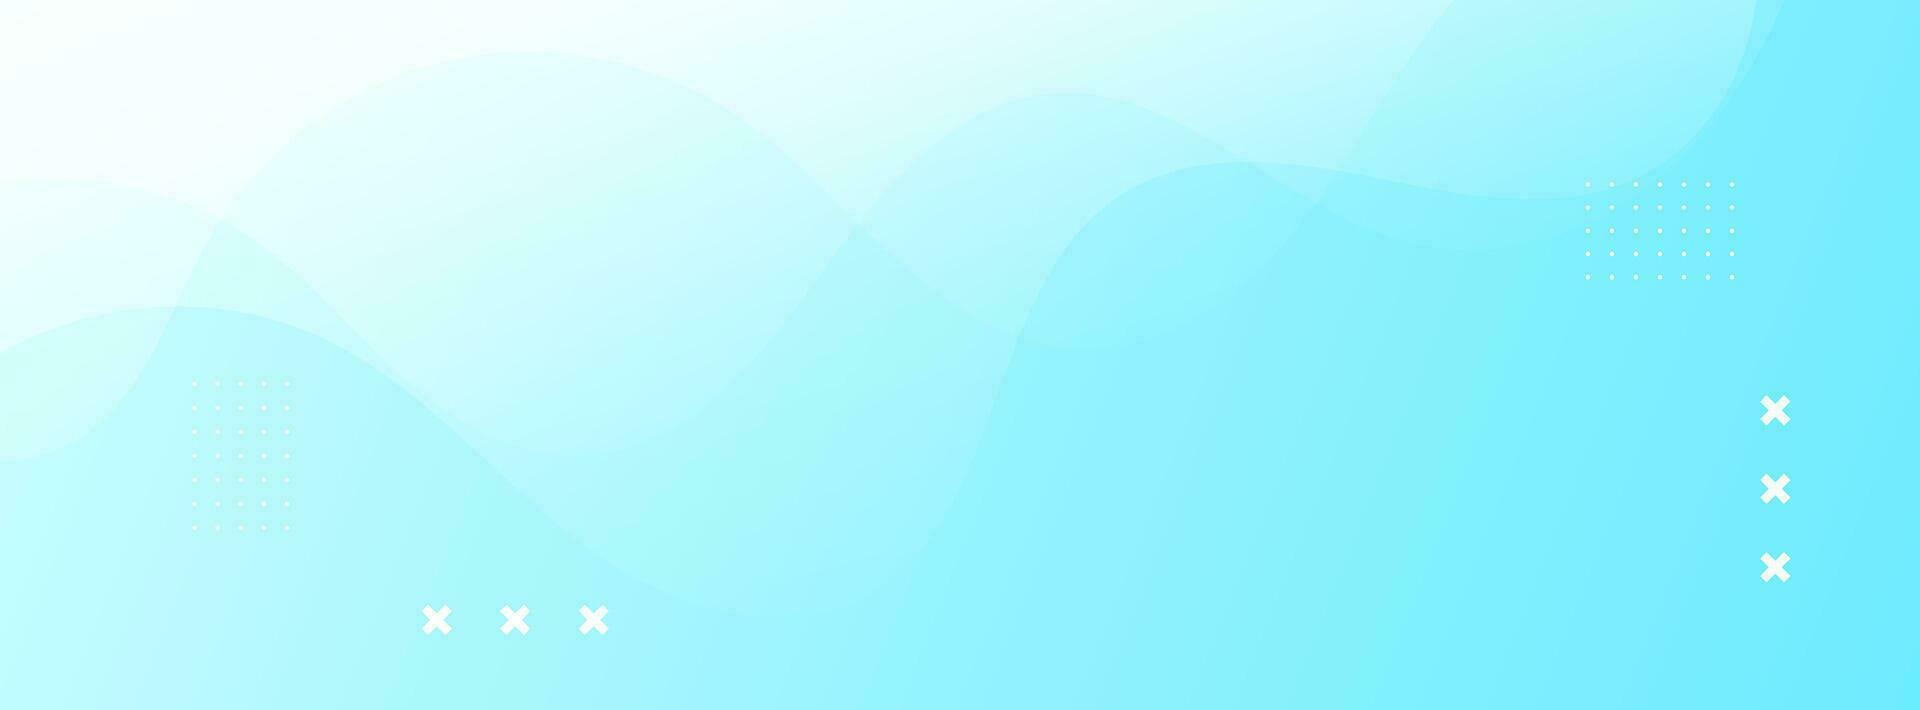 Banner background, colorful, blue gradation, wave effect abstract, eps 10 vector